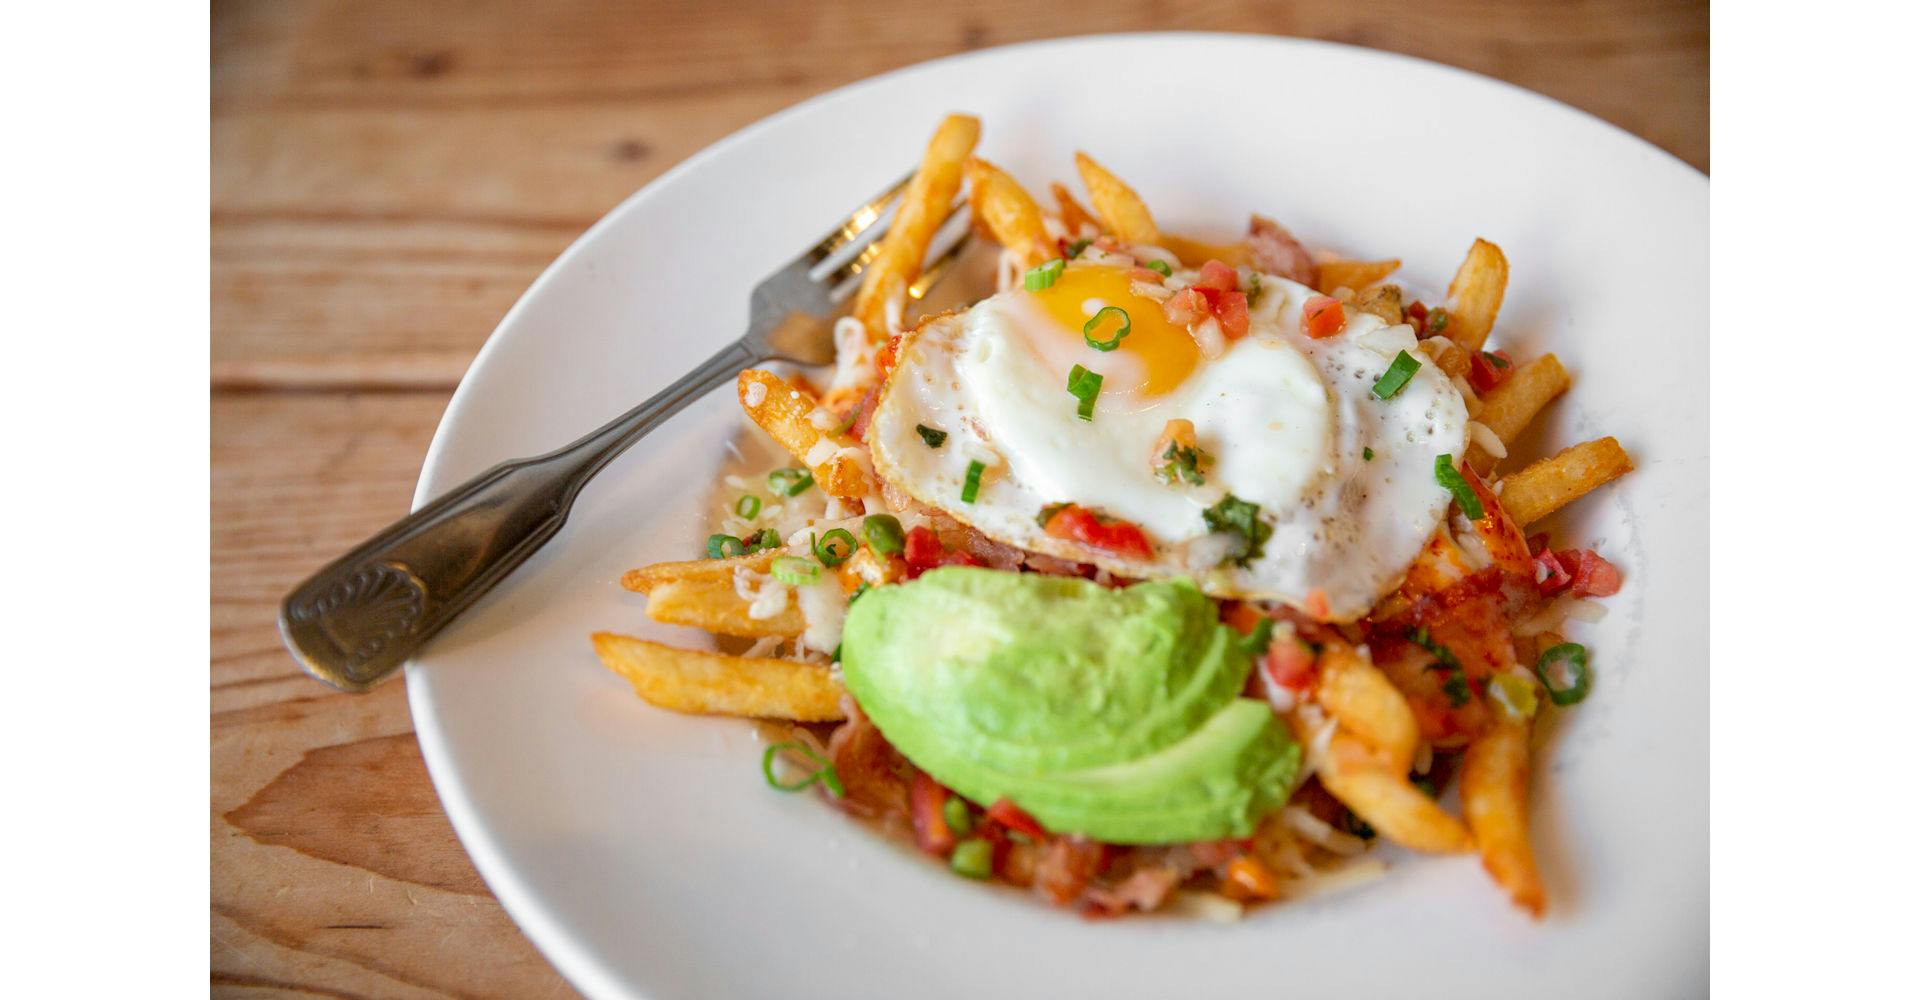 Loaded Breakfast Fries from Bites Restaurant in Forest Grove, OR